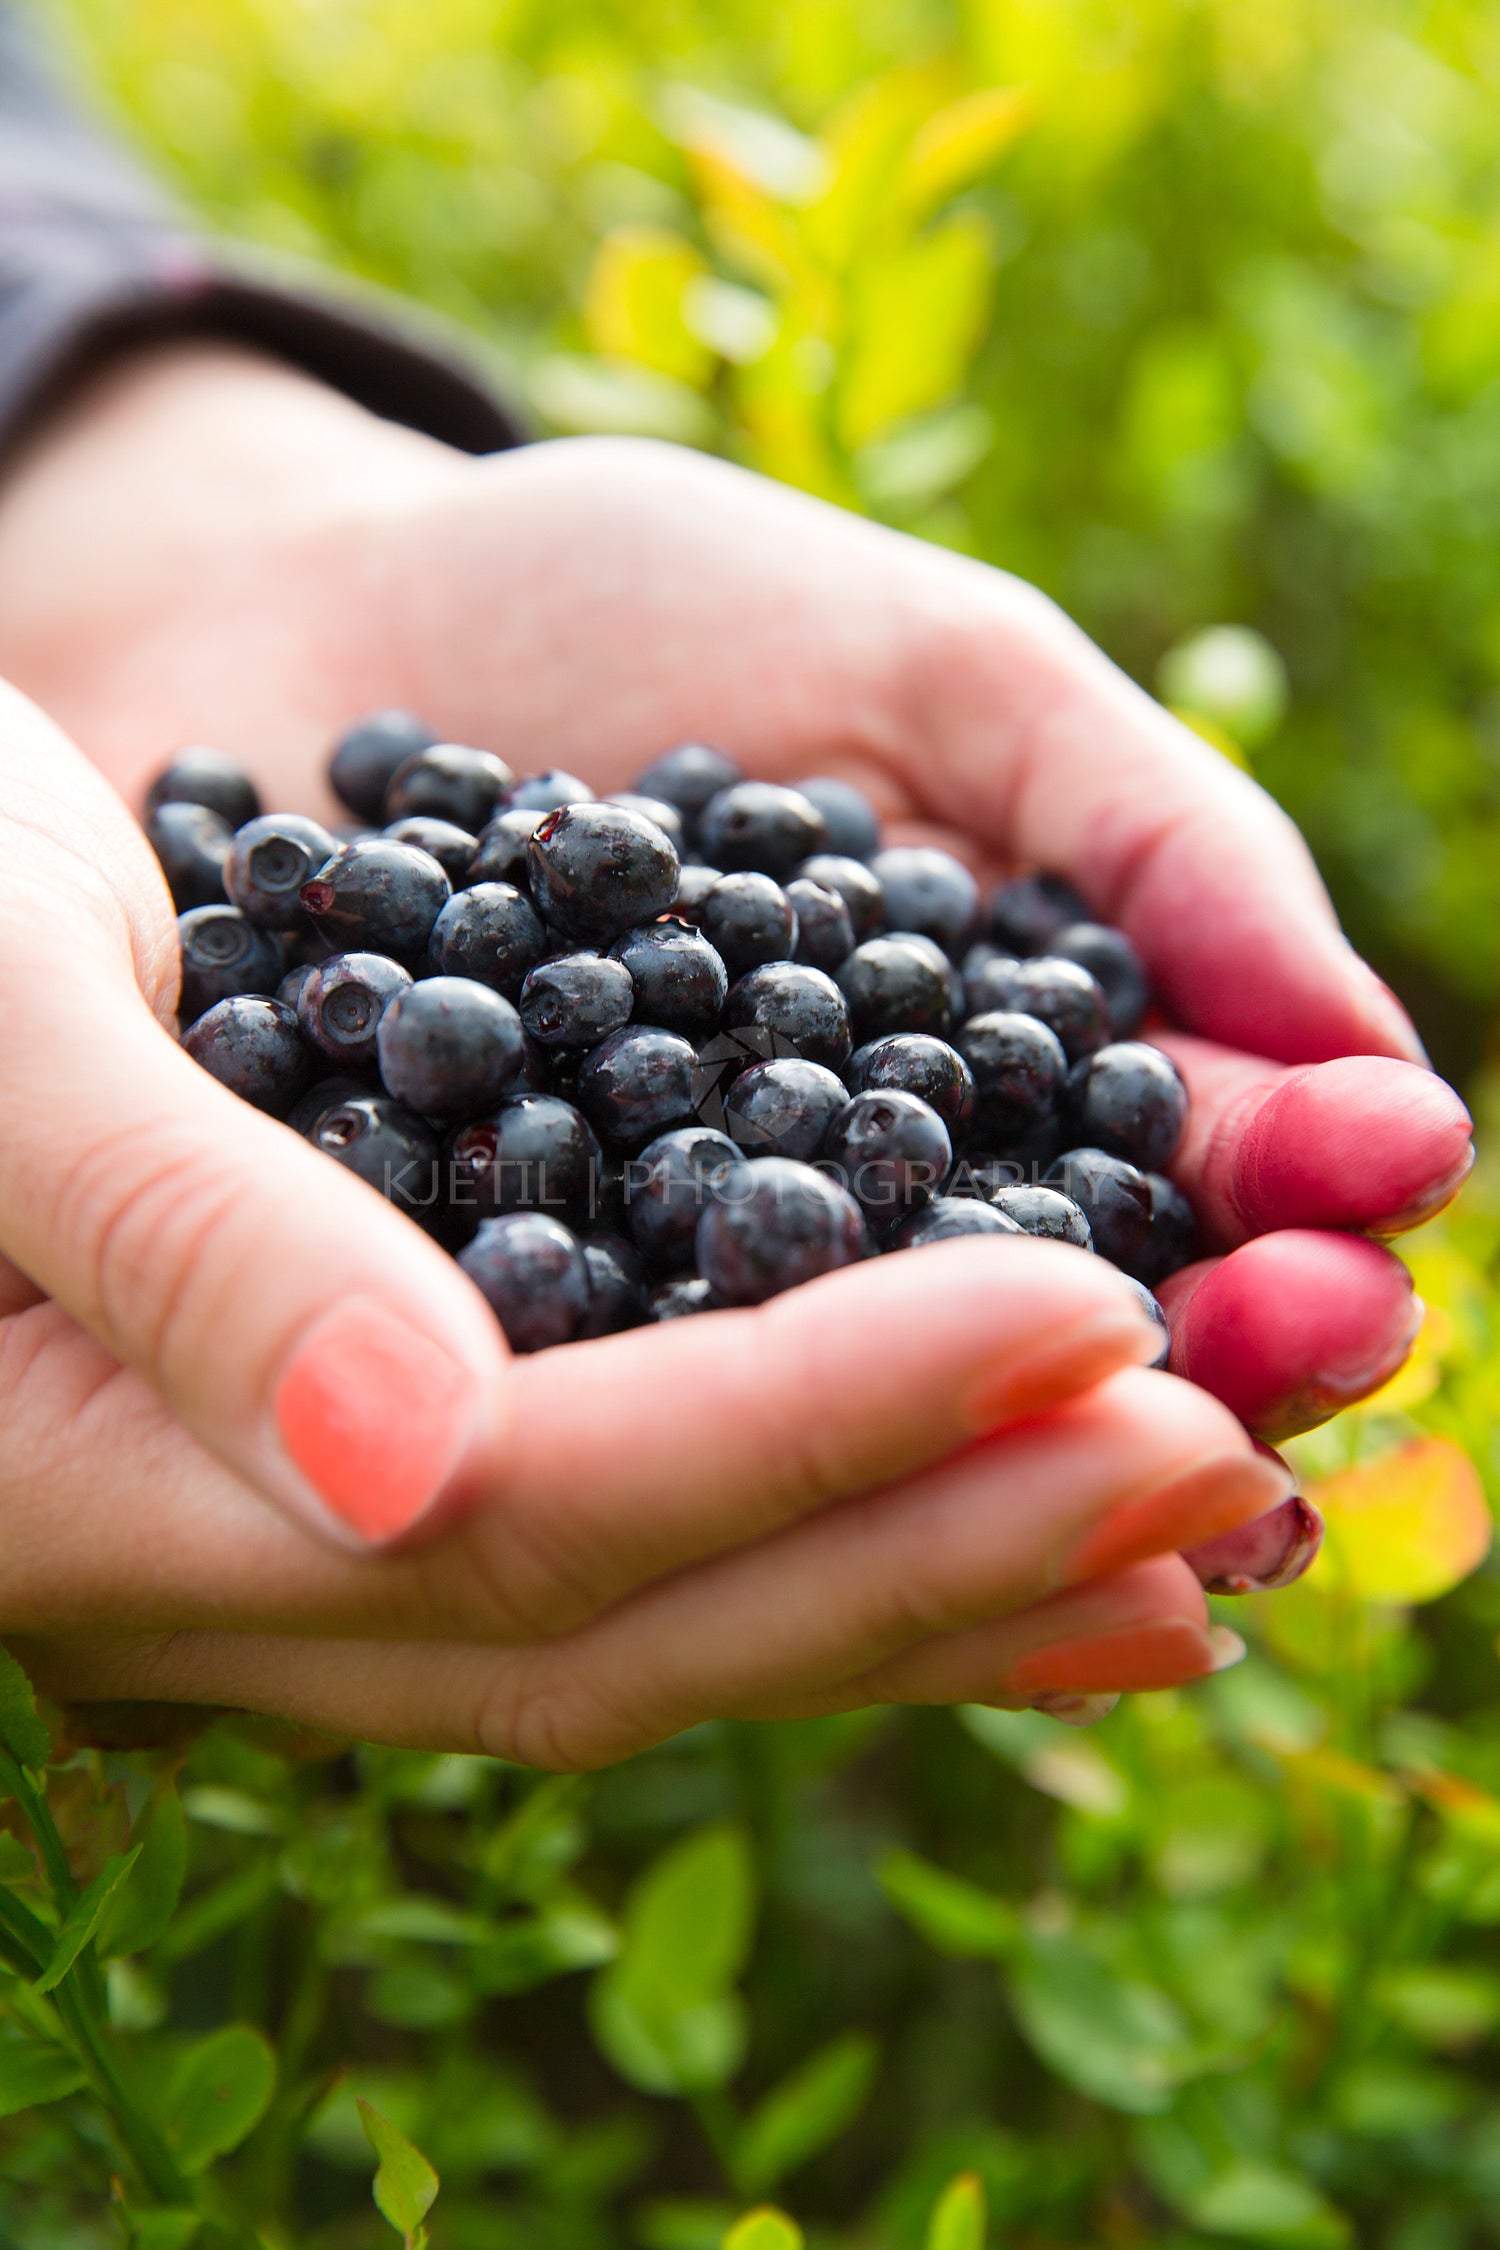 Woman picking healthy blueberries in the woods